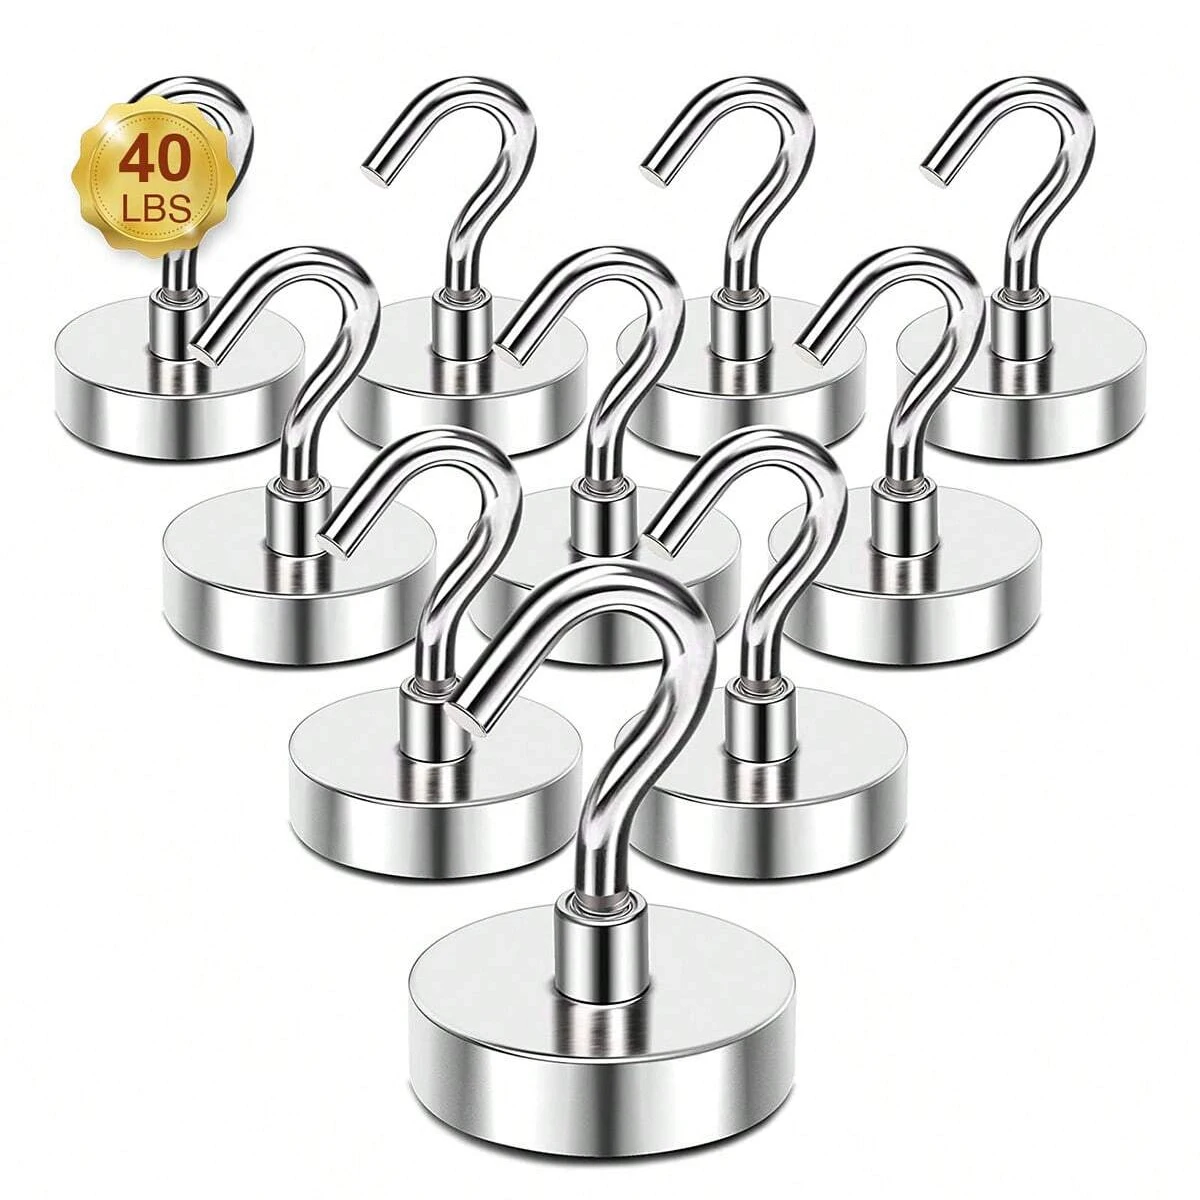 Magnetic Hooks Heavy Duty 40Lbs for Cruise Cabins Strong Magnets Neodymium with Hooks for Hanging Magnetic Wall Hooks